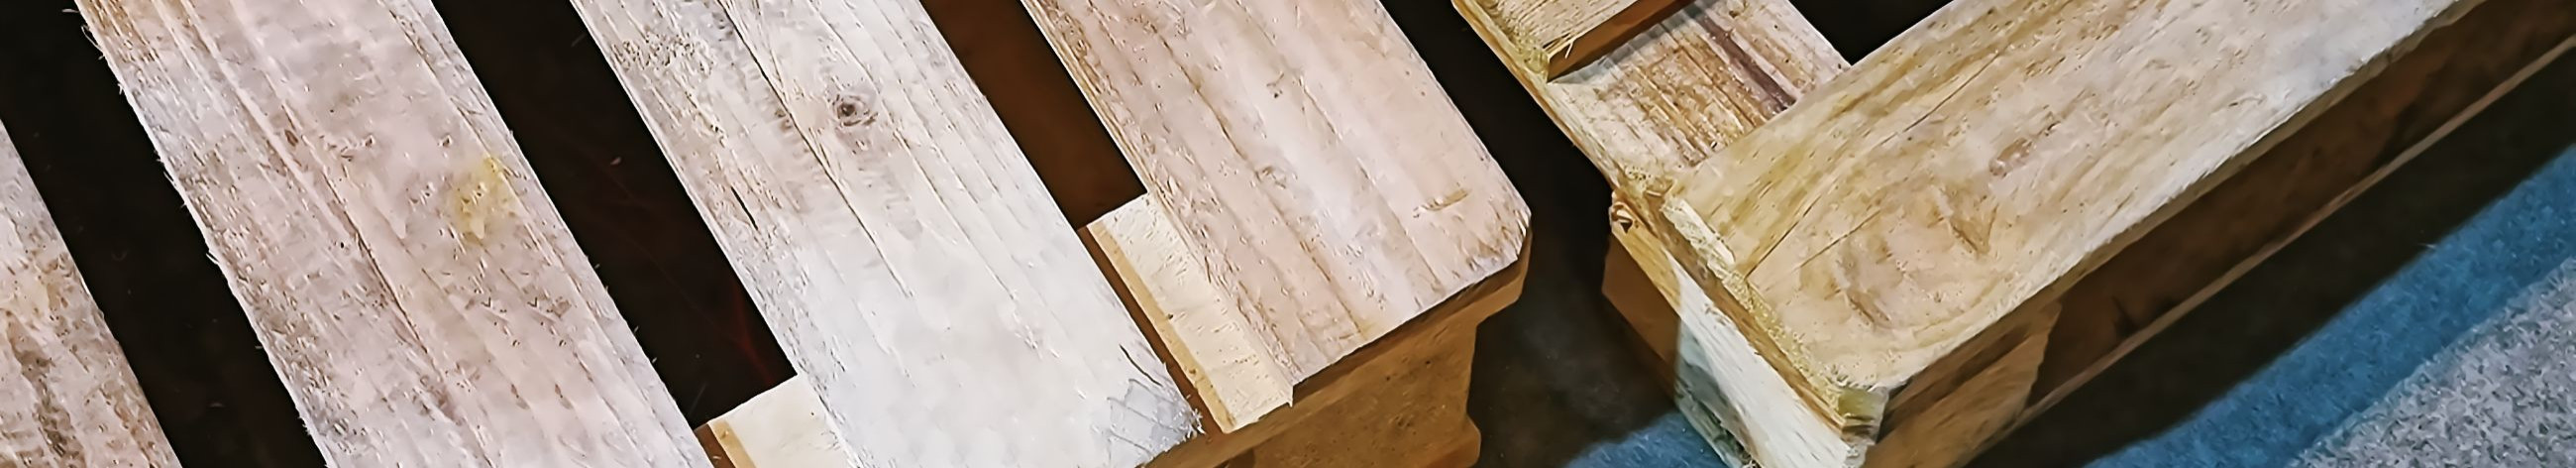 custom solutions, repair of pallets and other wood packaging, packaging design, recovery and recycling, buying pallets, used pallets, new pallets, EPAL pallets, one-way pallets, FIN pallets